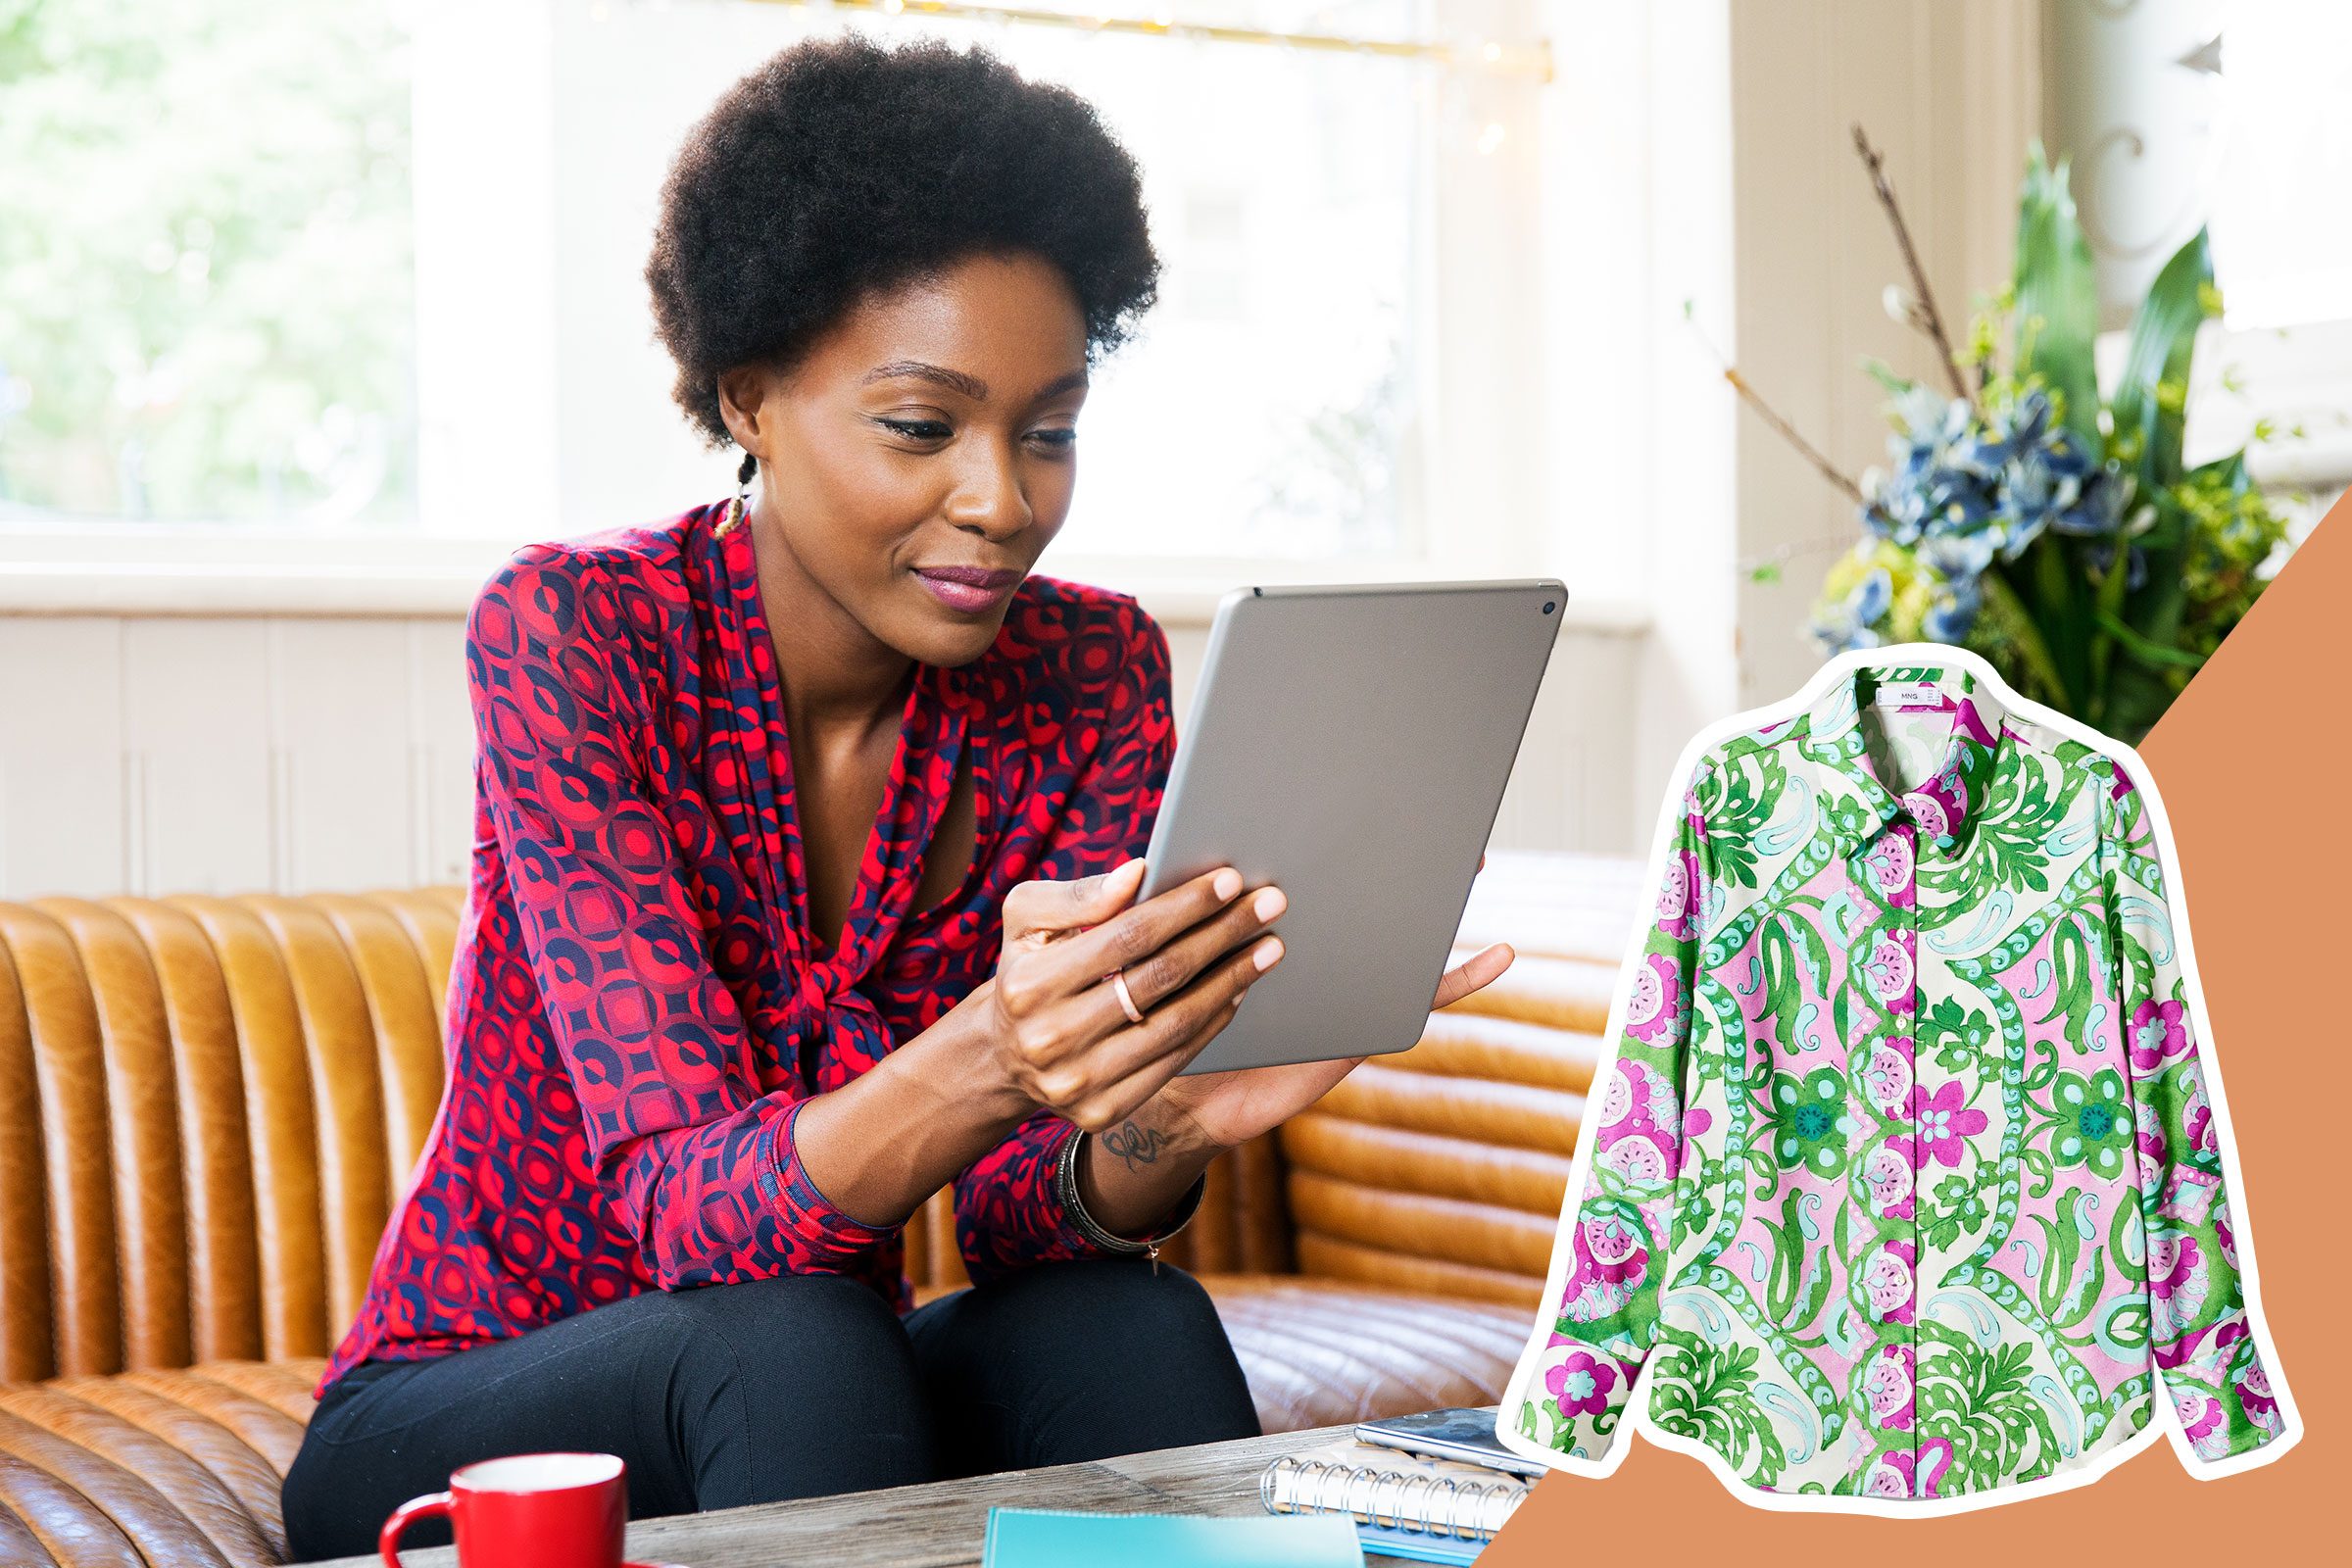 woman using a tablet wearing a patterned shirt